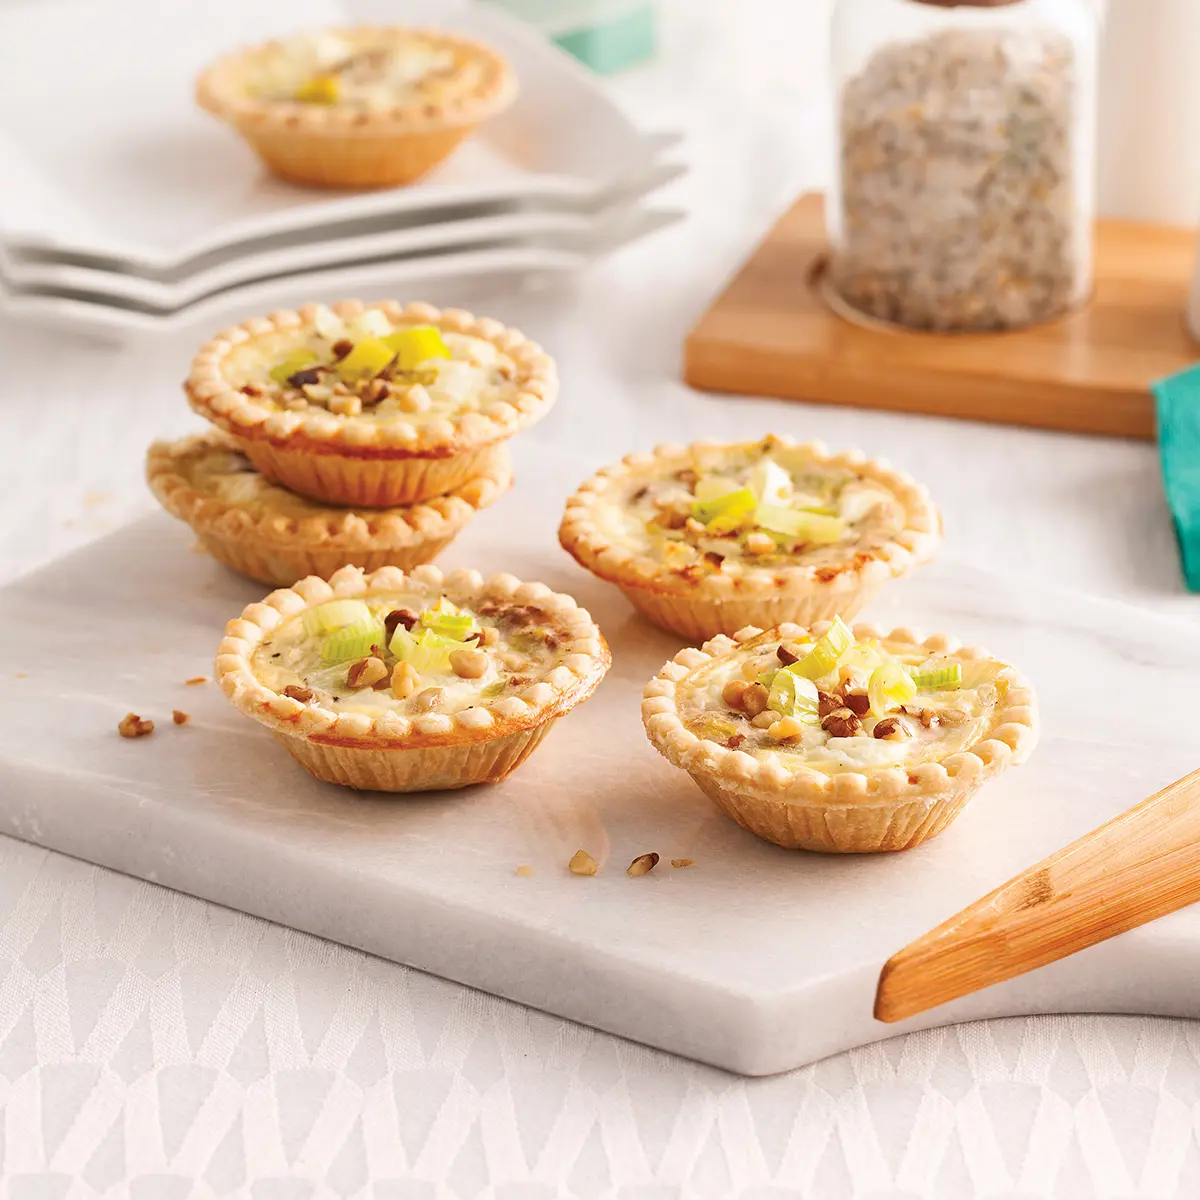 Goat cheese, leeks and nuts tartlets